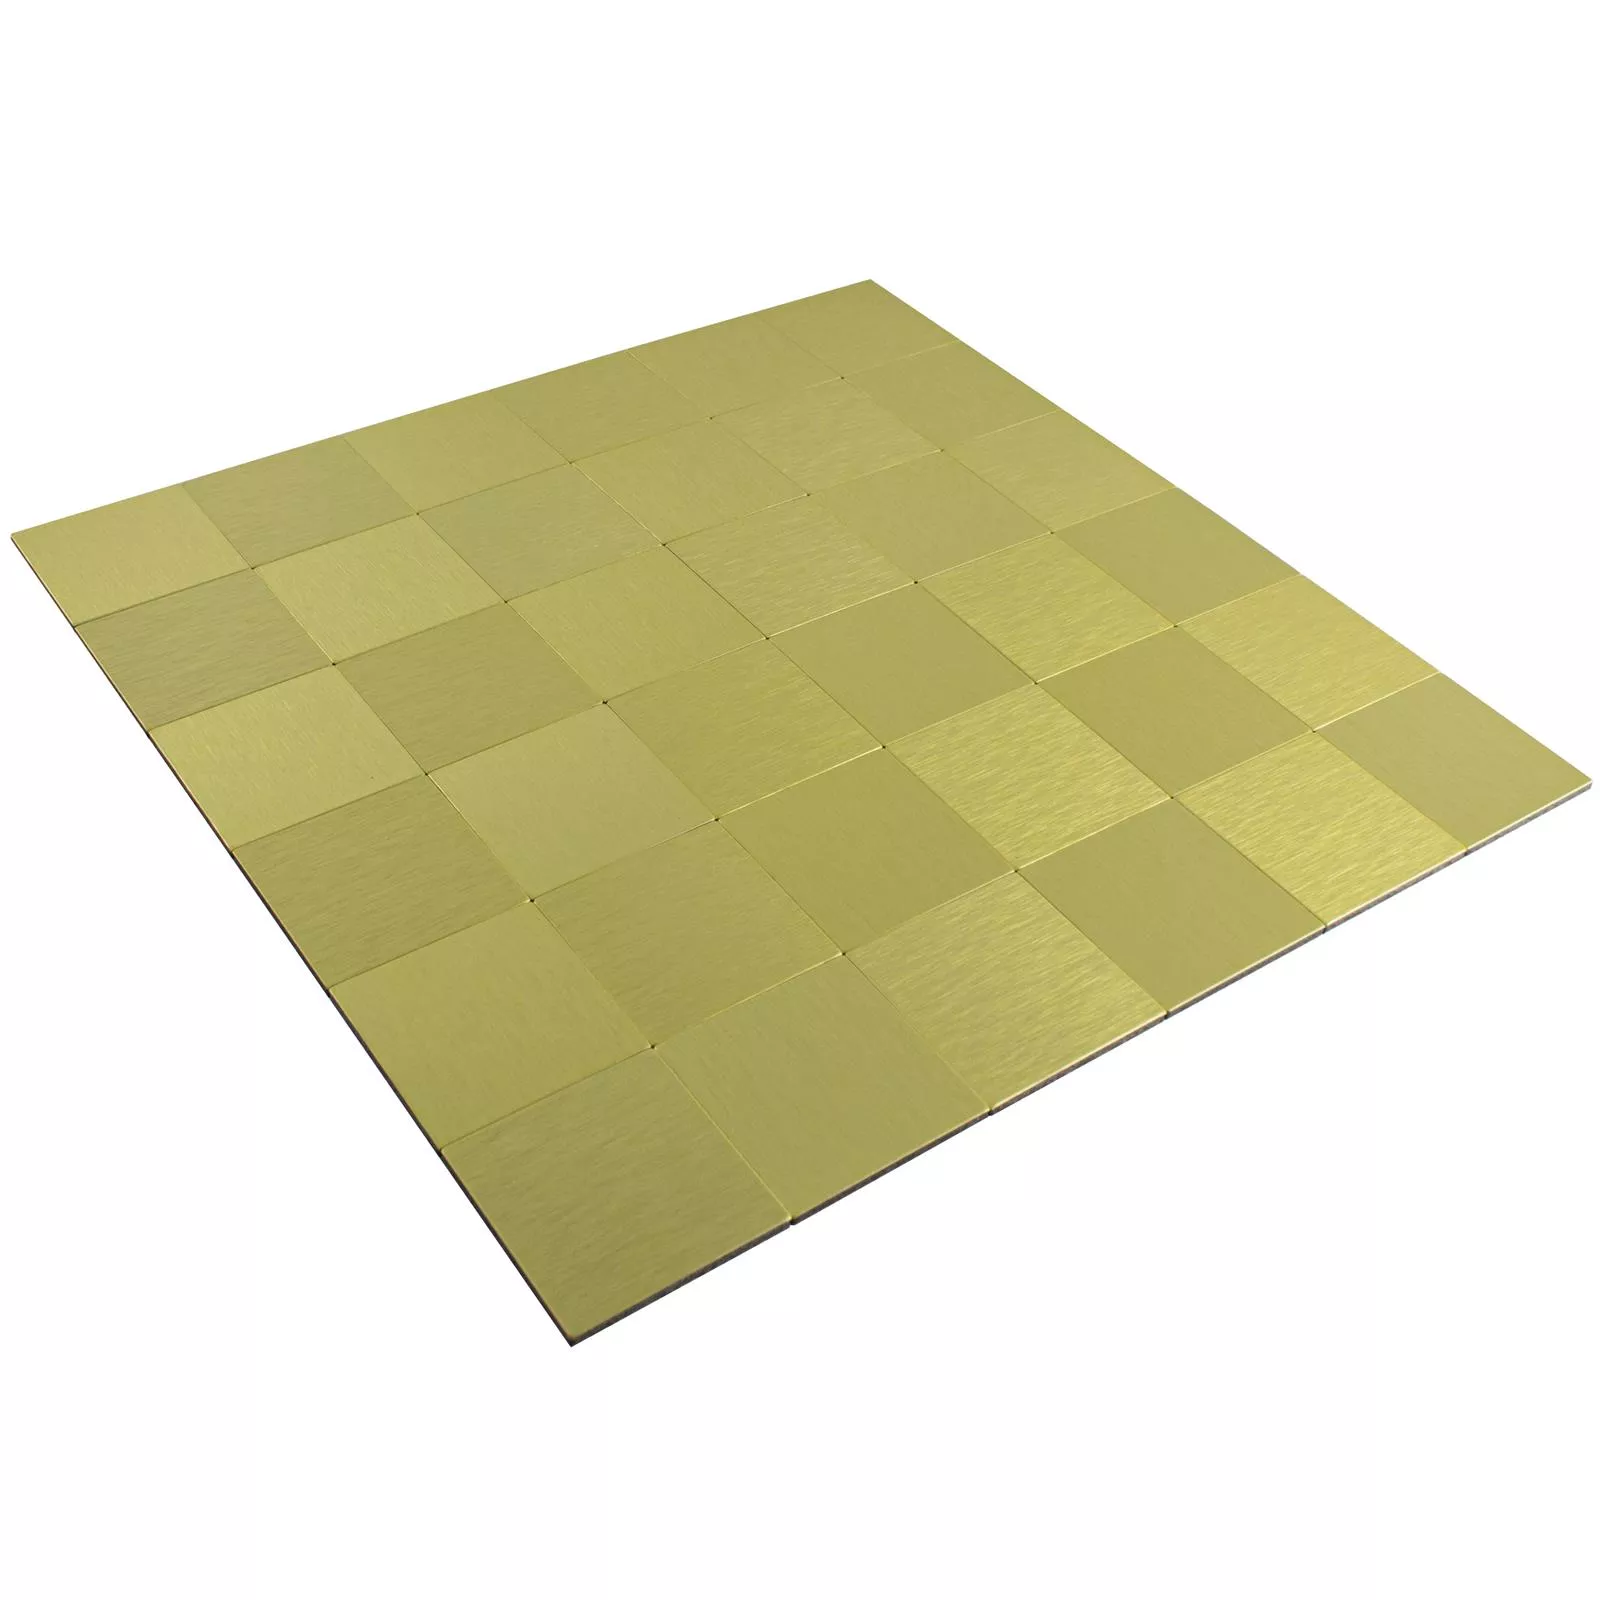 Sample from Mosaic Tiles Metal Self Adhesive Vryburg Gold Square 